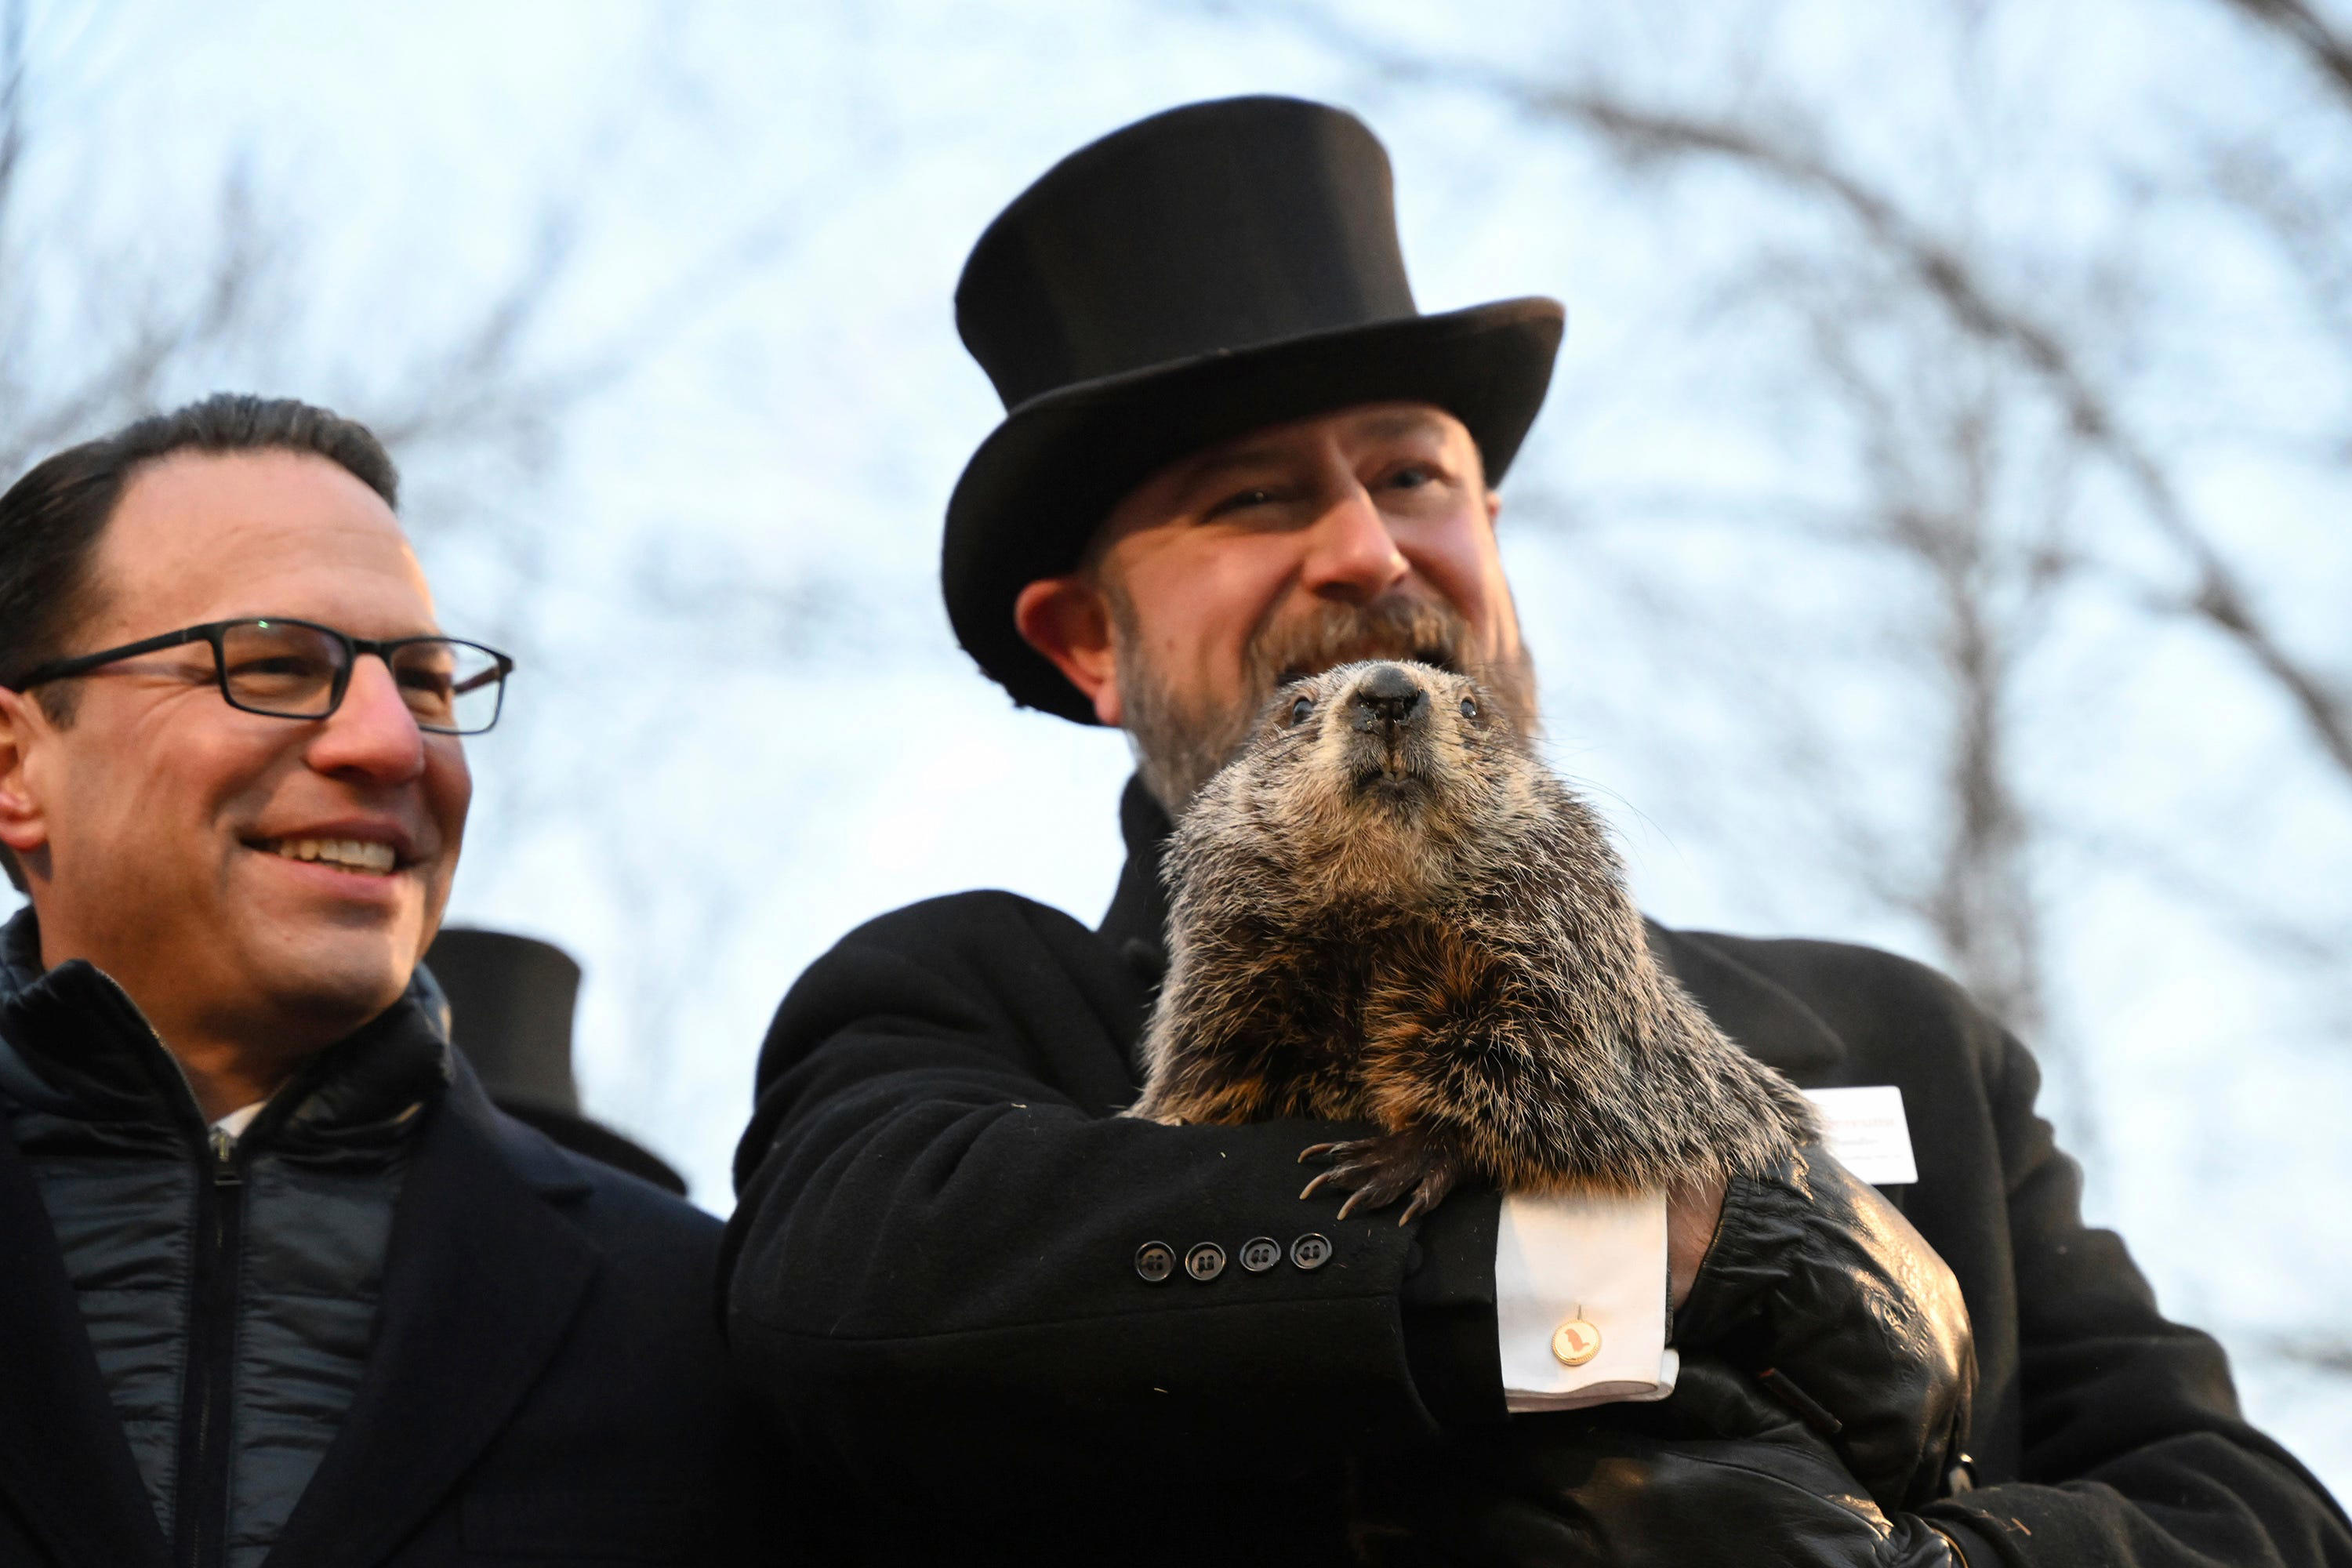 Groundhog Day 2024 full video Watch Punxsutawney Phil as he looks for